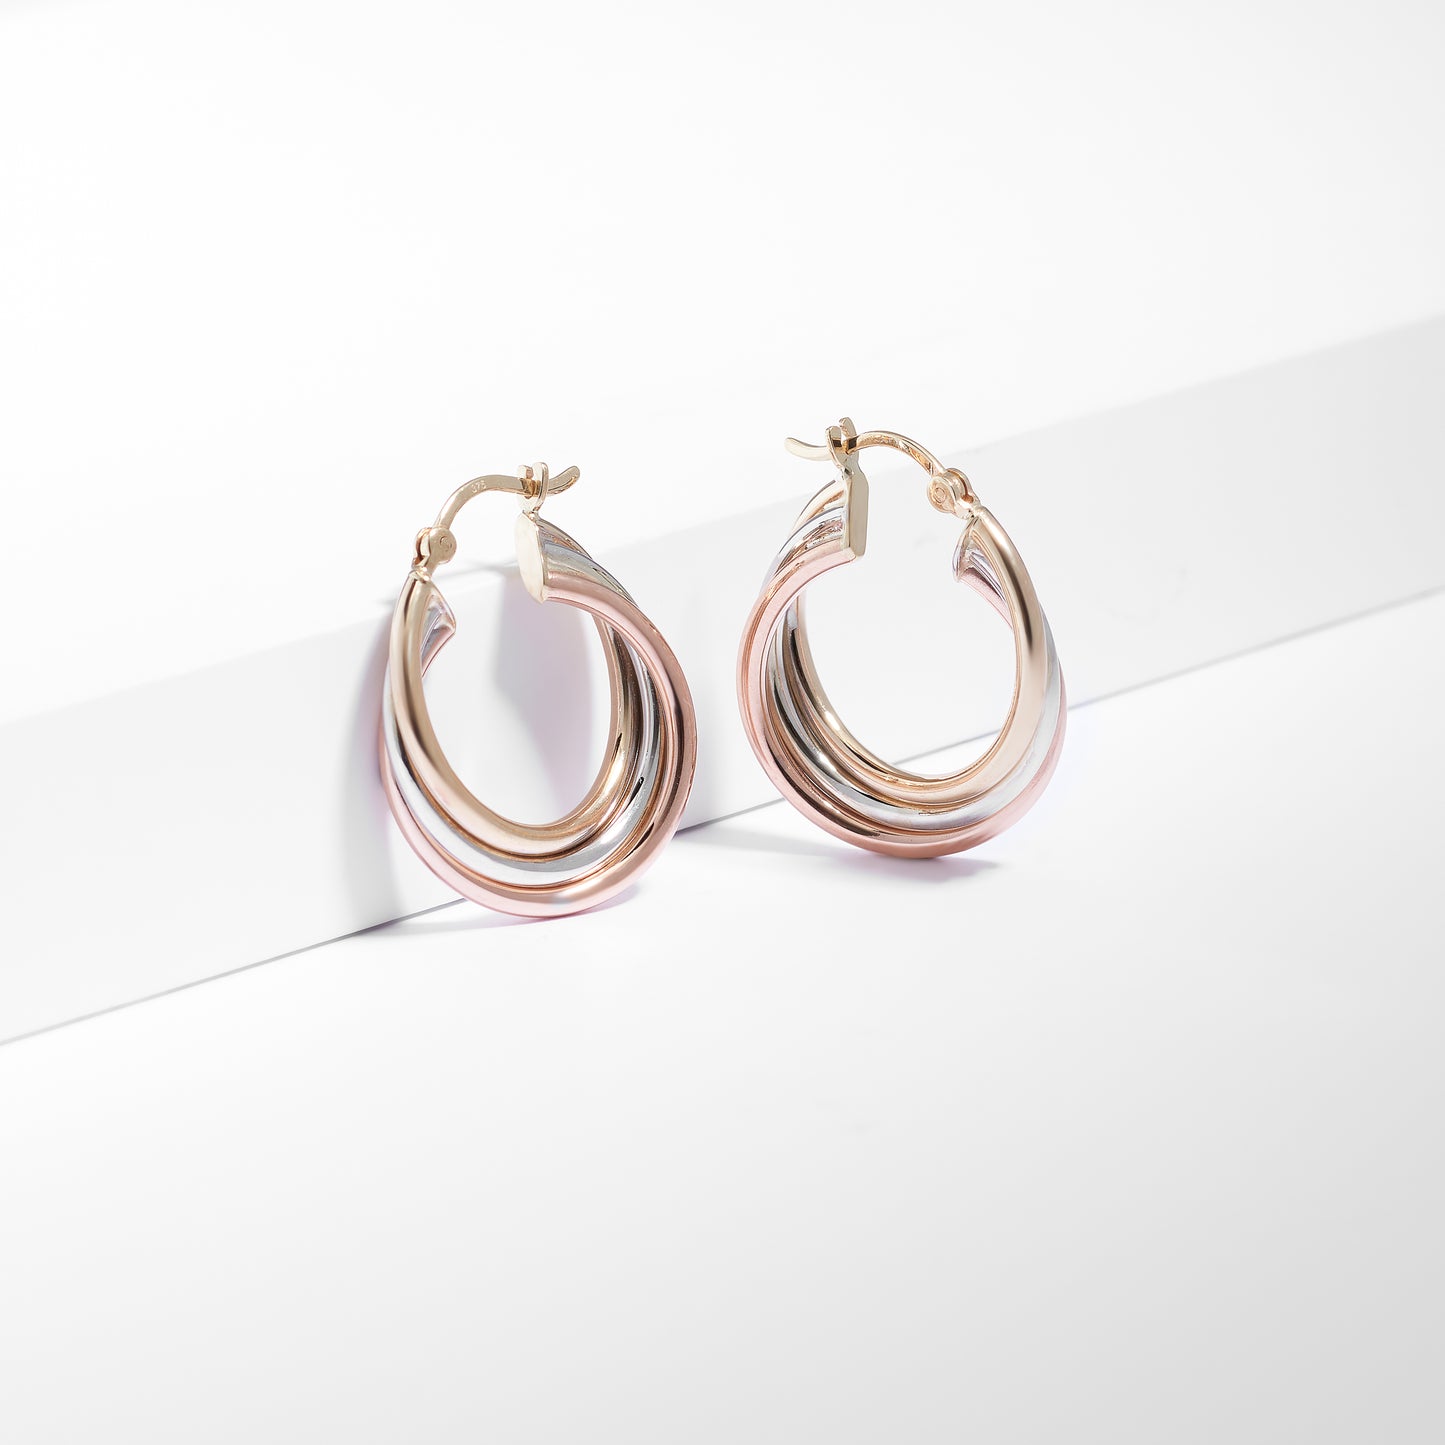 9K Yellow, White And Rose Gold Trio Twist Hoop Earrings 20mm